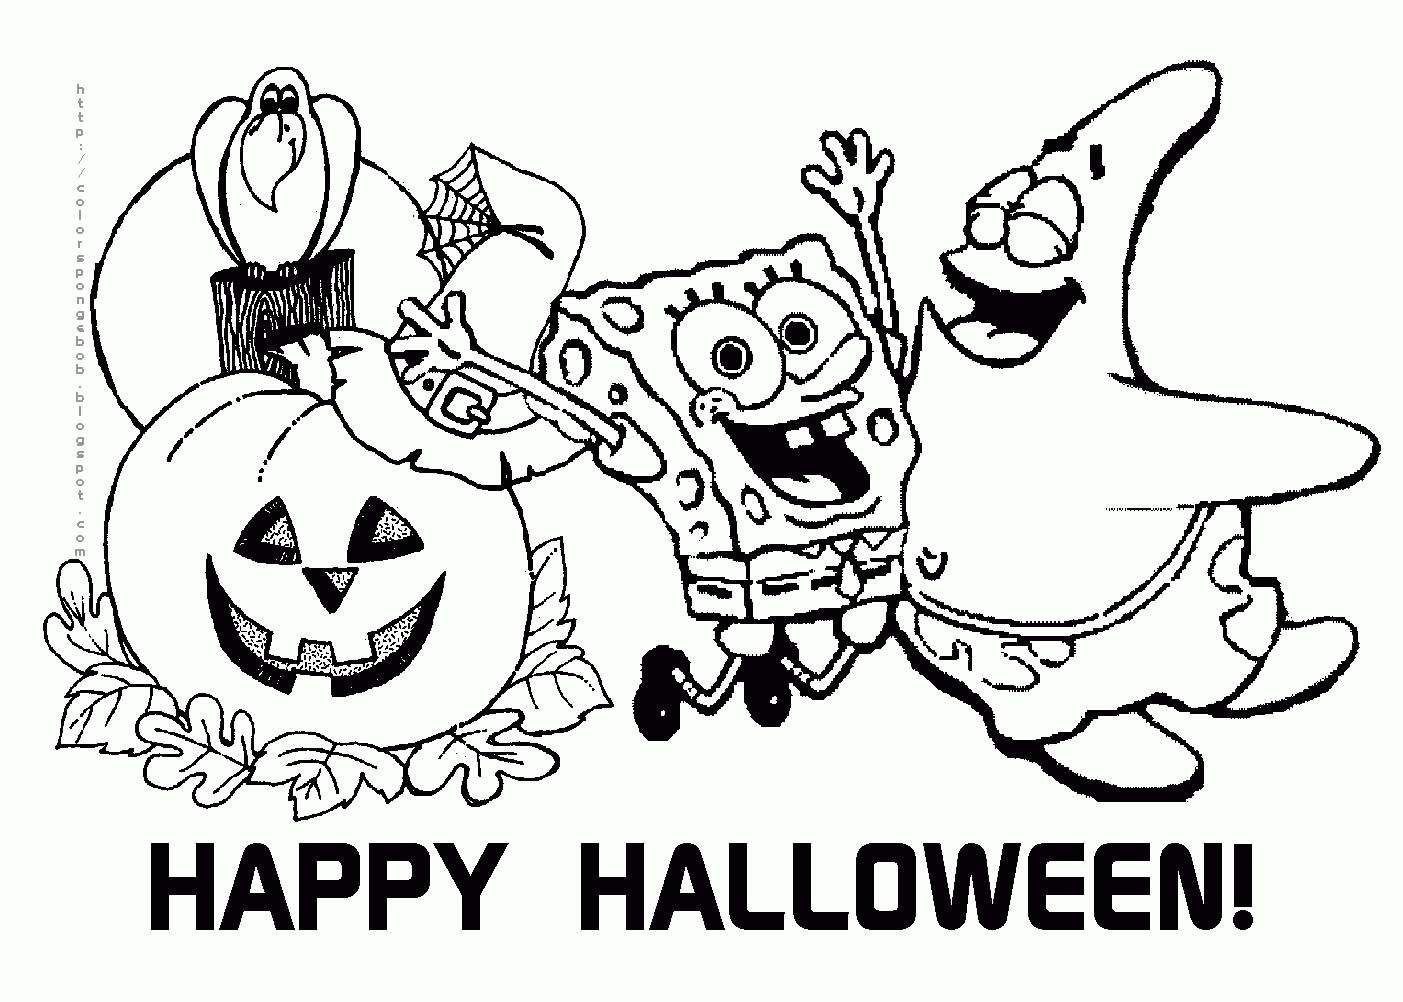 Spongebob Squarepants Coloring Page - Coloring Pages for Kids and ...